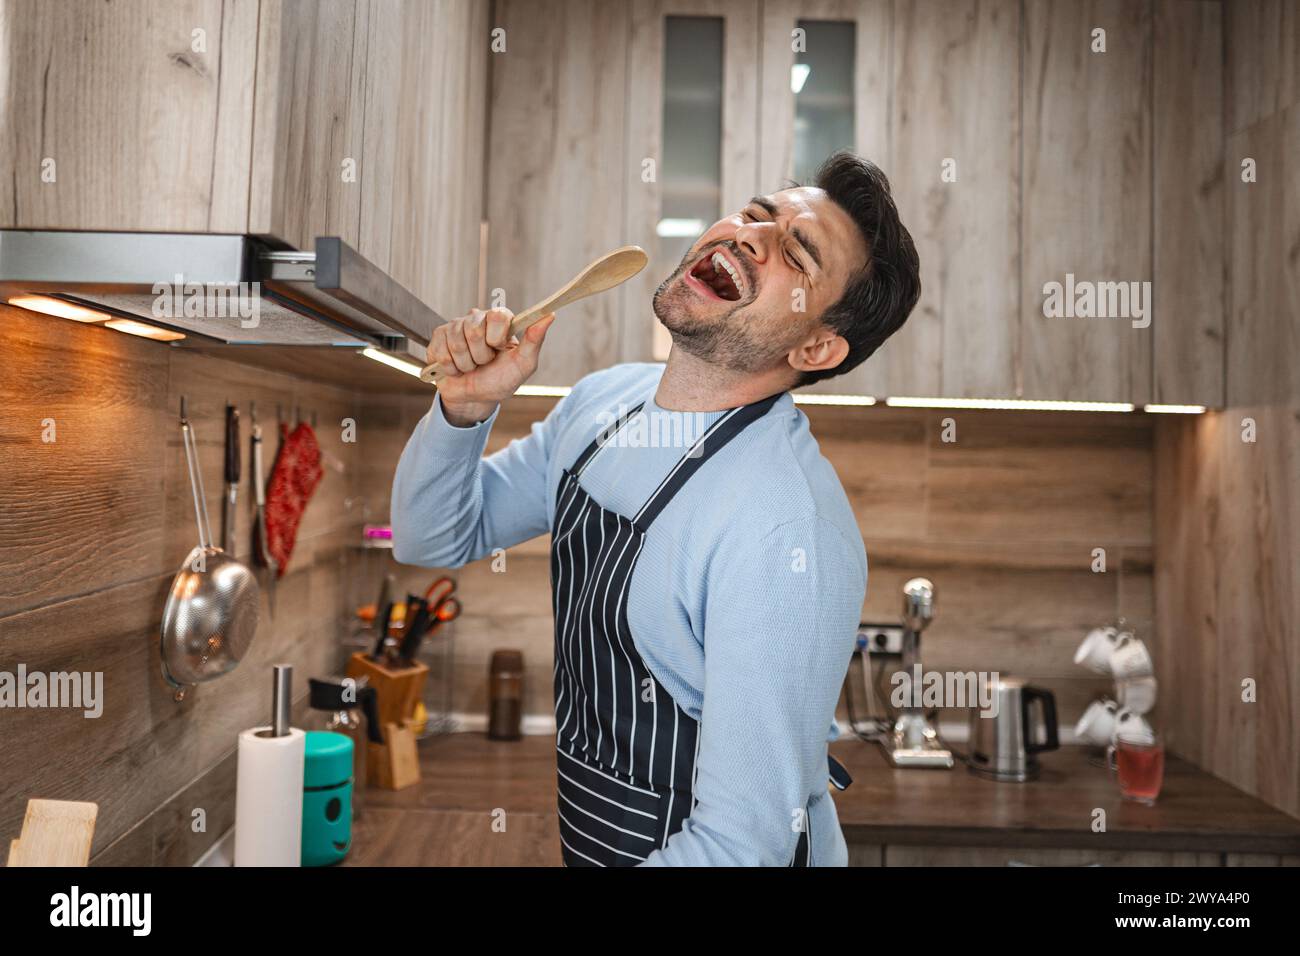 Man holds a spatula in his apron and sings in the kitchen Stock Photo